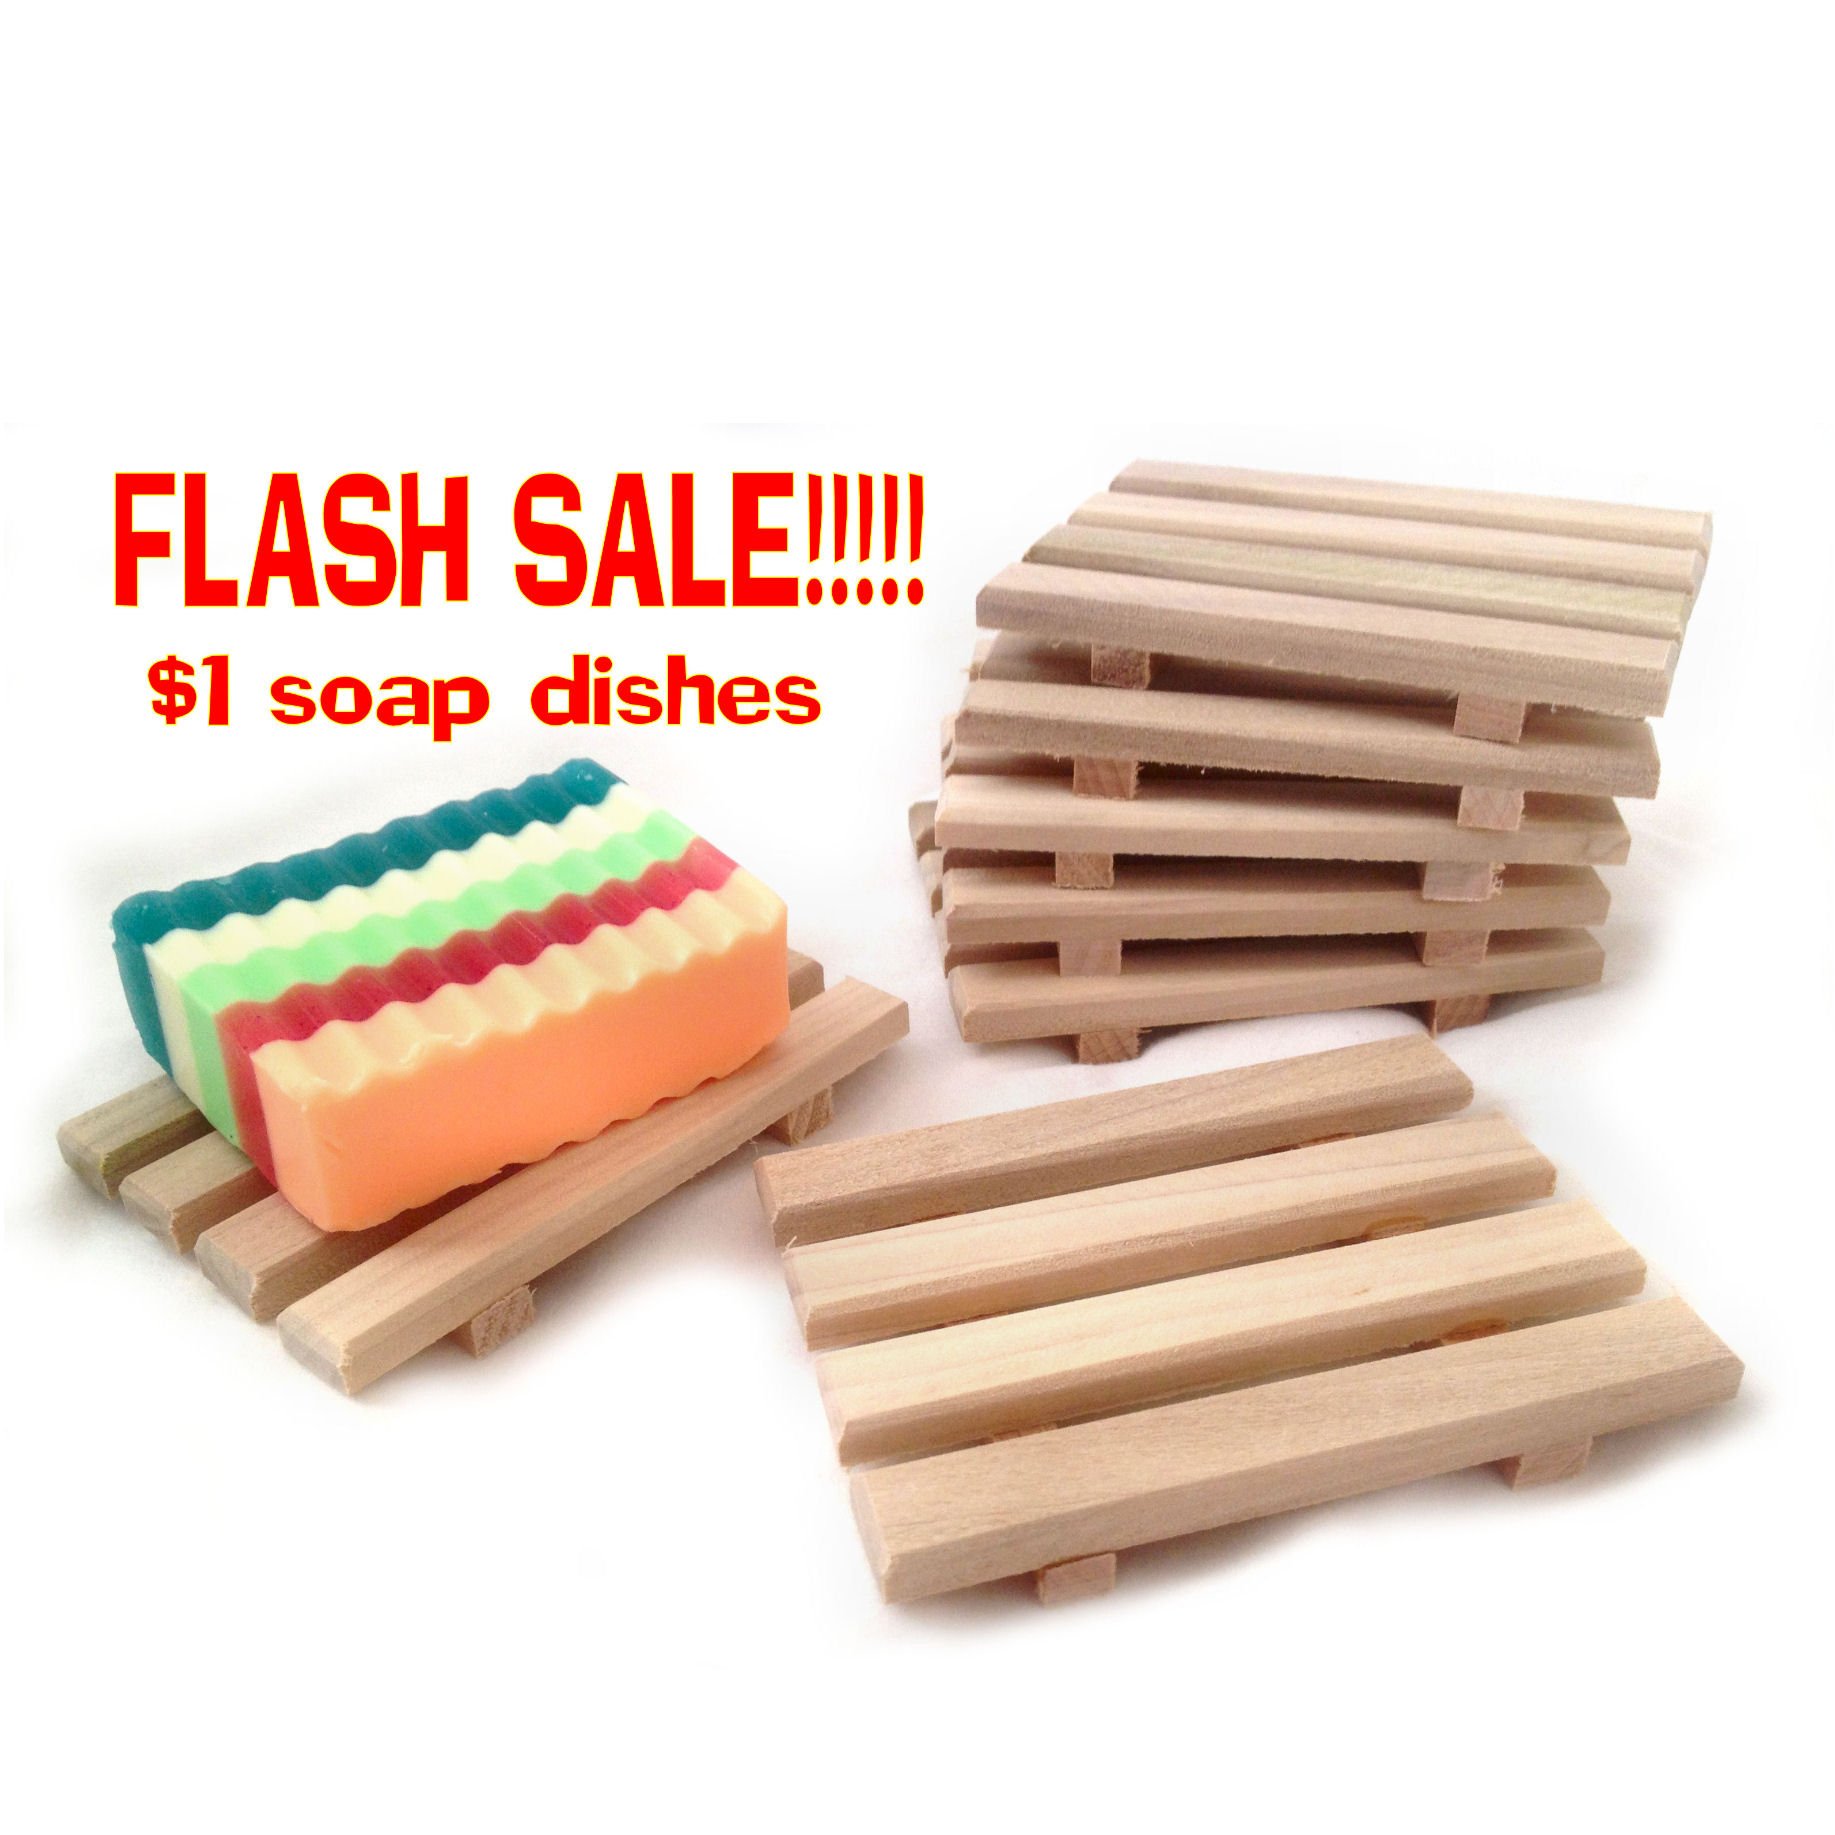 20 for $20-20 handcrafted in the USA wood soap dishes $1 each FLASH SALE! 